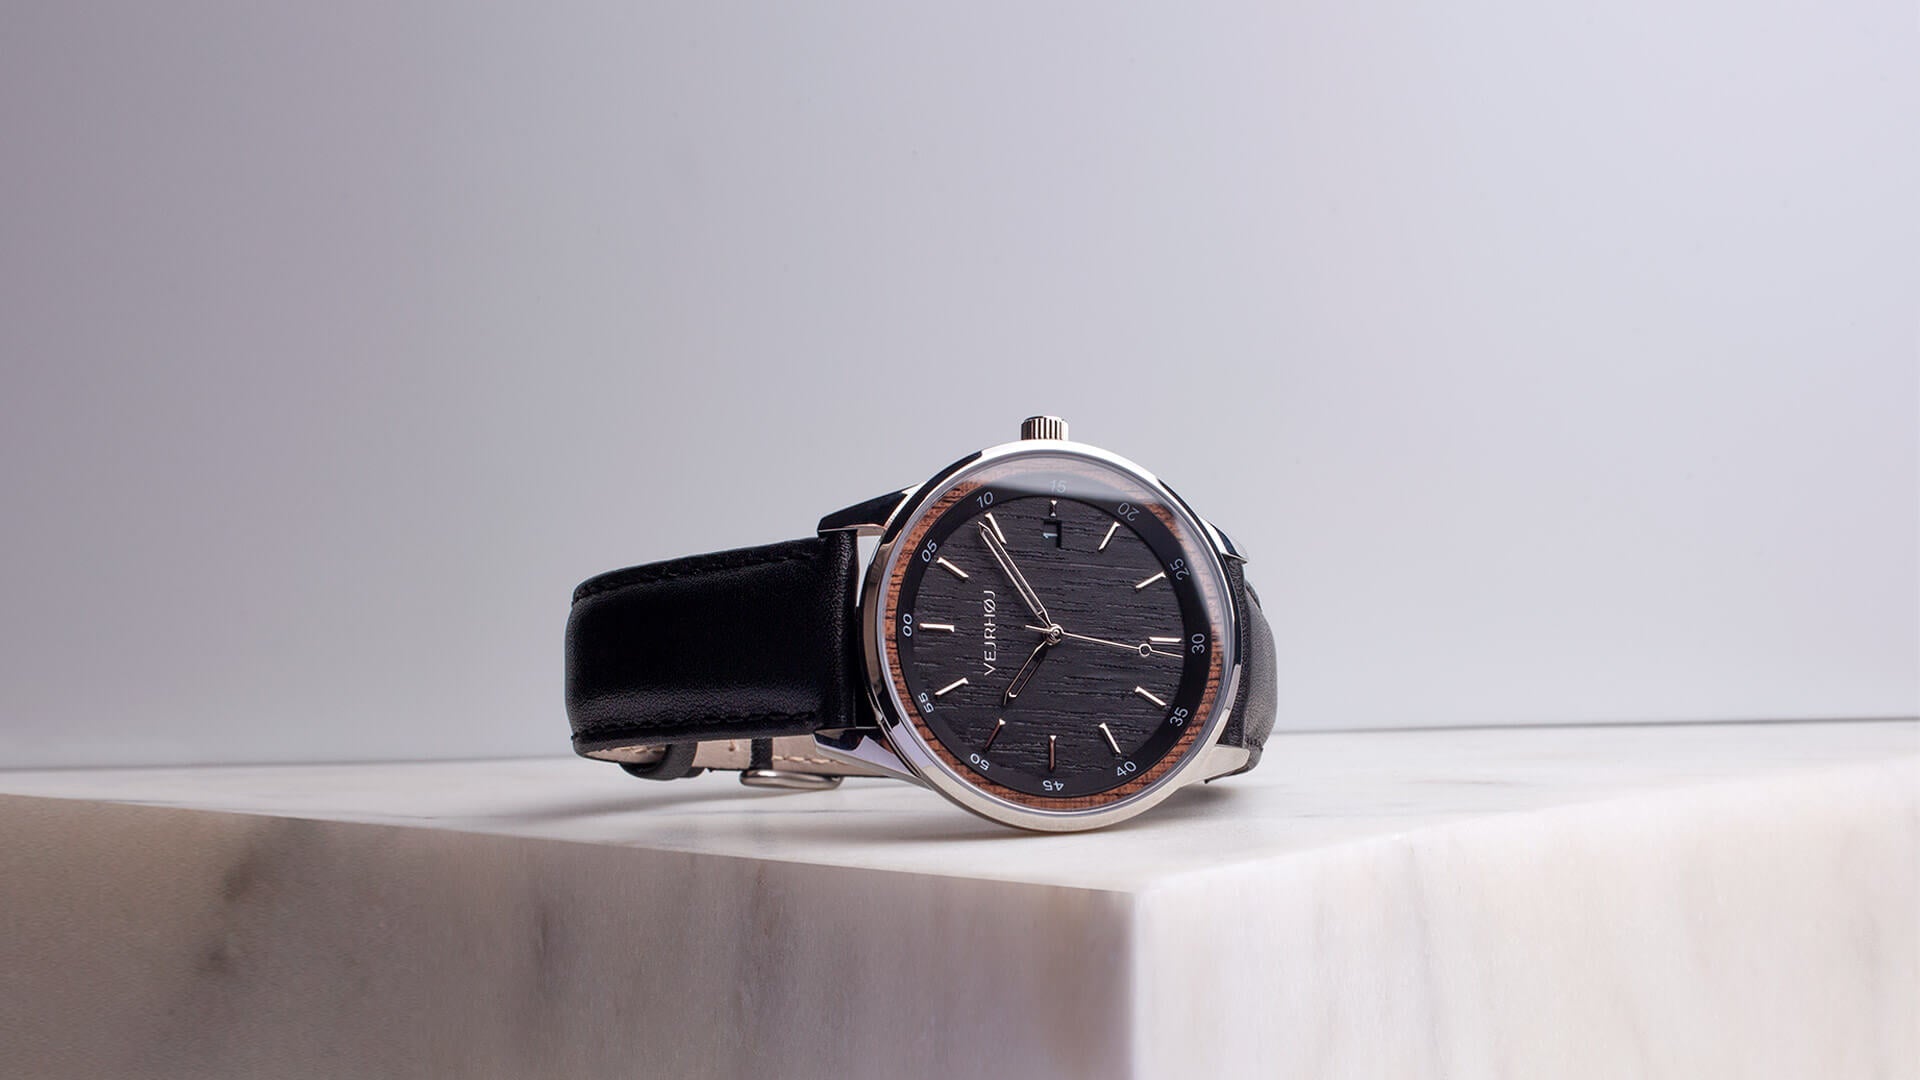 VEJRHØJ | Automatic watches crafted from wood & steel